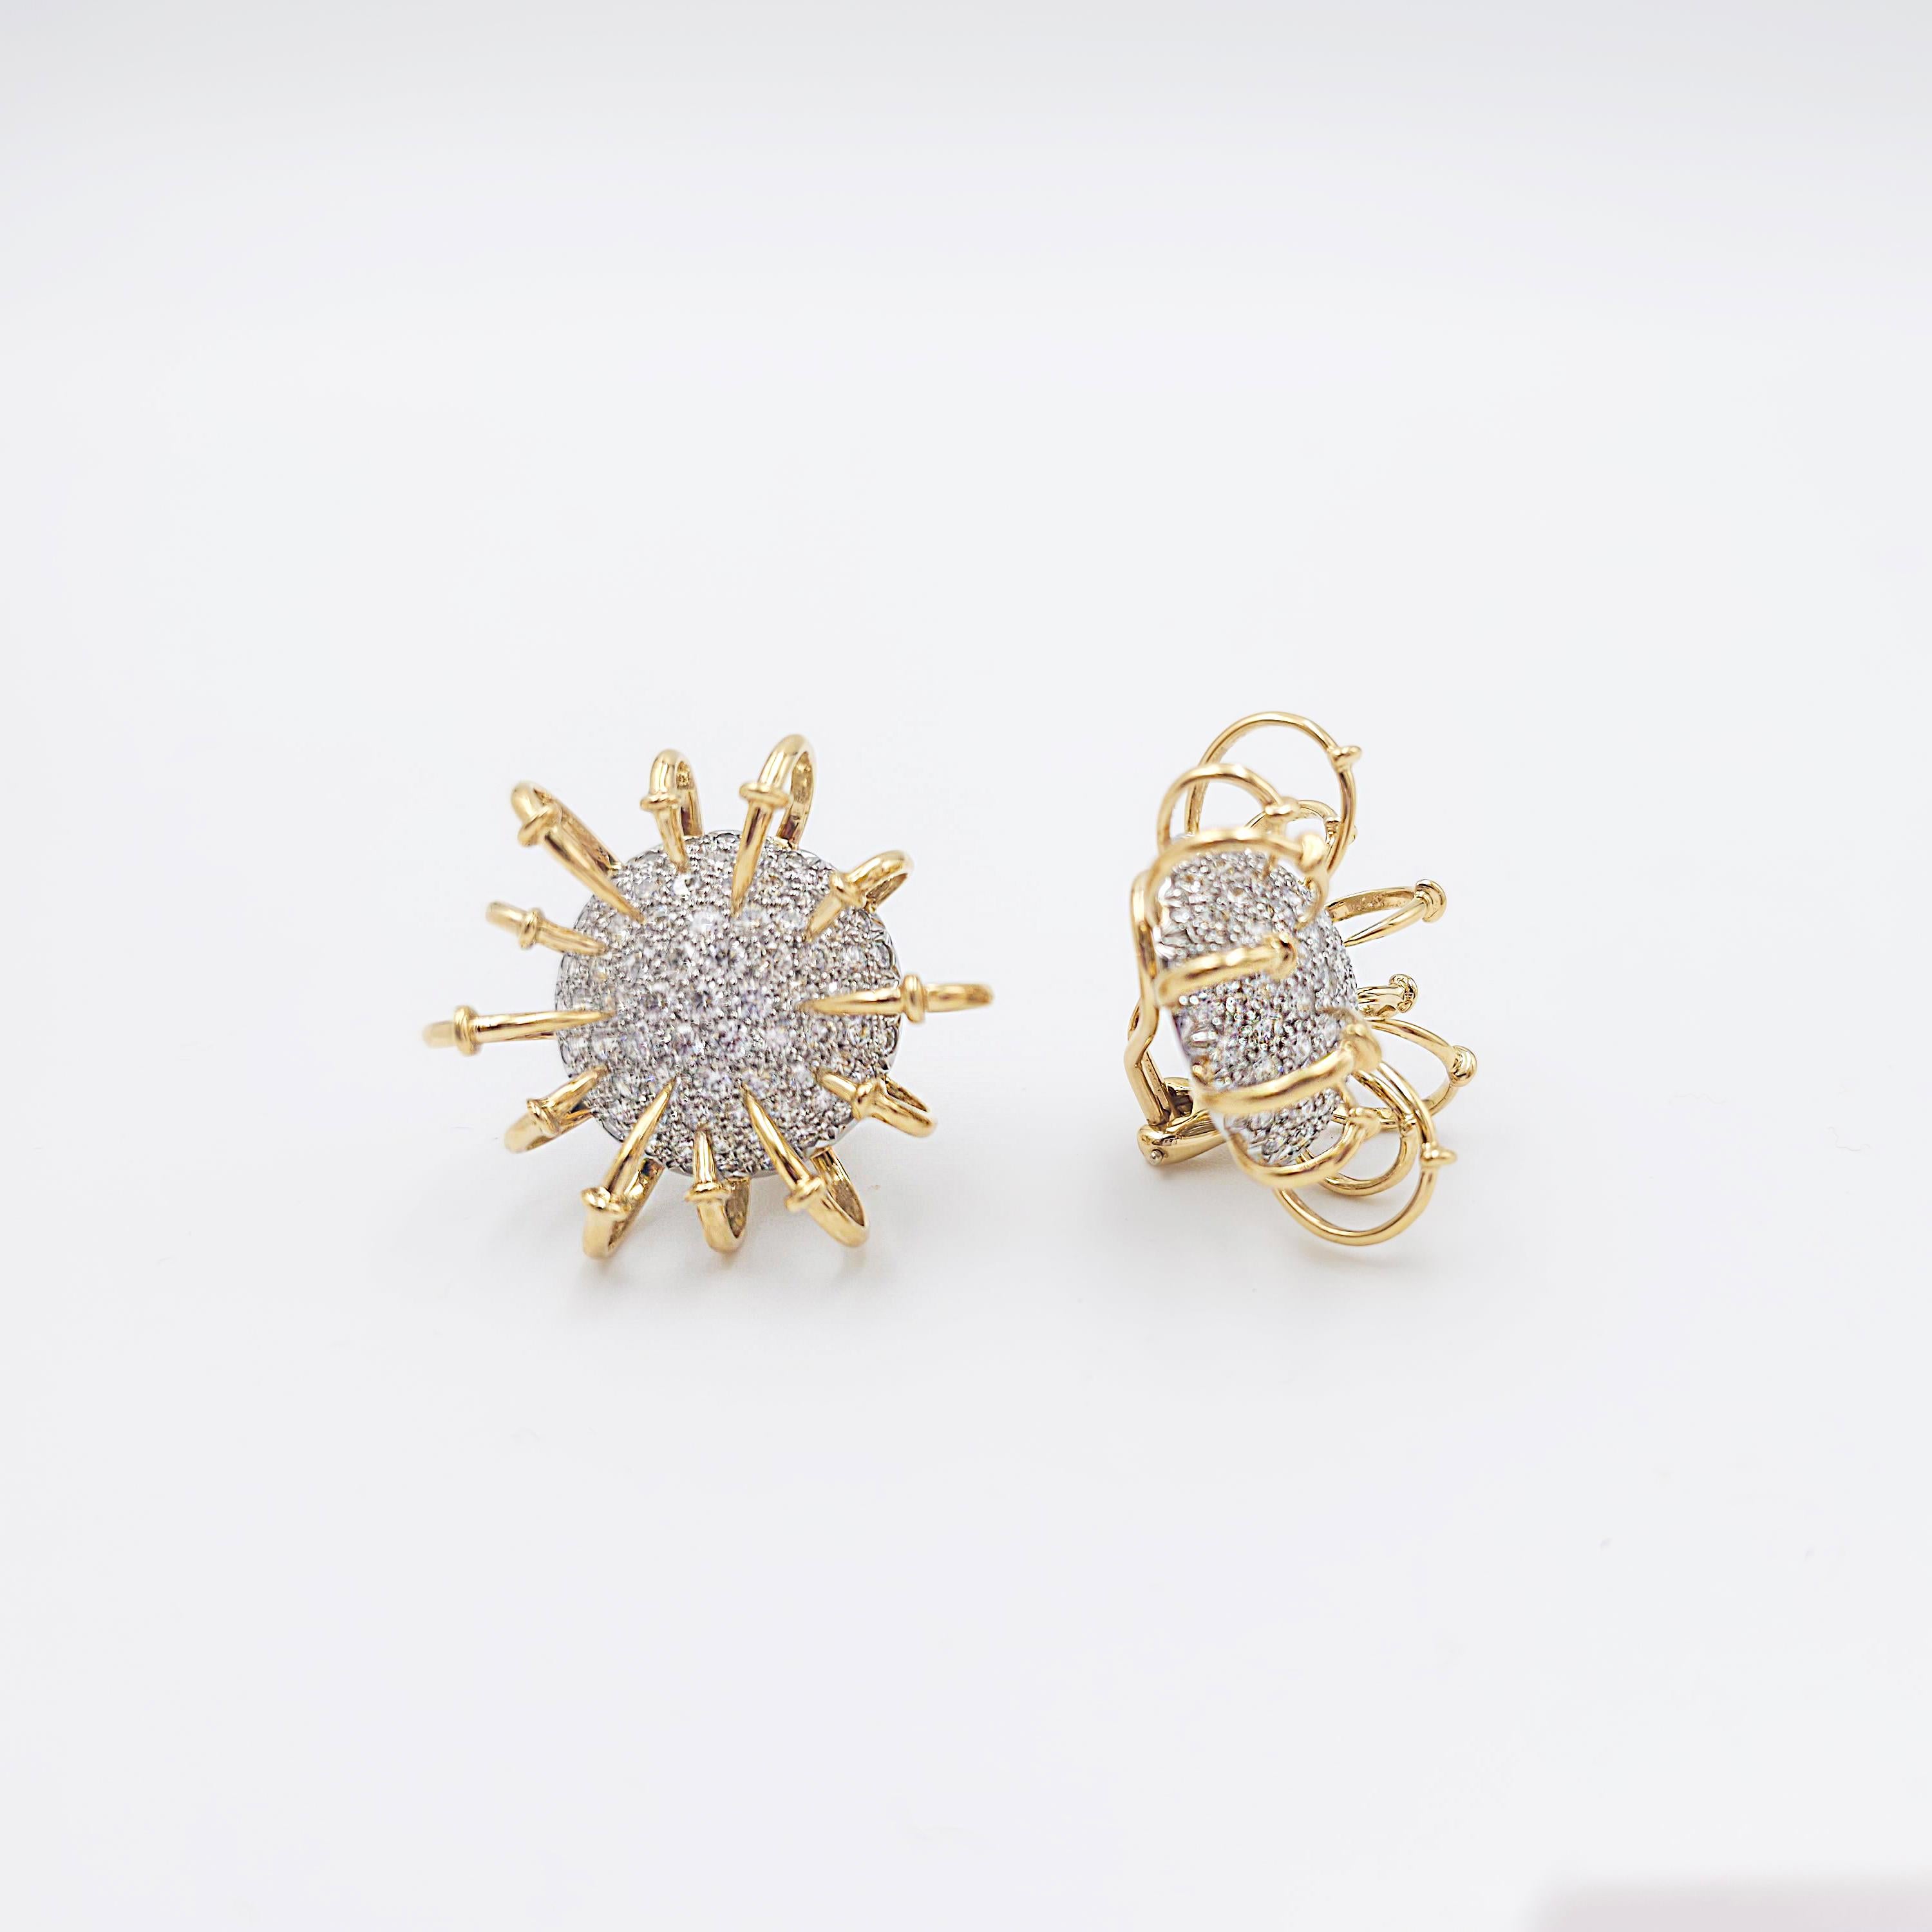 An authentic and striking pair of Jean Schlumberger for Tiffany & Co. earrings from the 'Apollo' collection. Inspired by electrons circling an atom, the circular bombé-style earrings are set with gleaming pavé diamonds (E-F, VS) weighing an